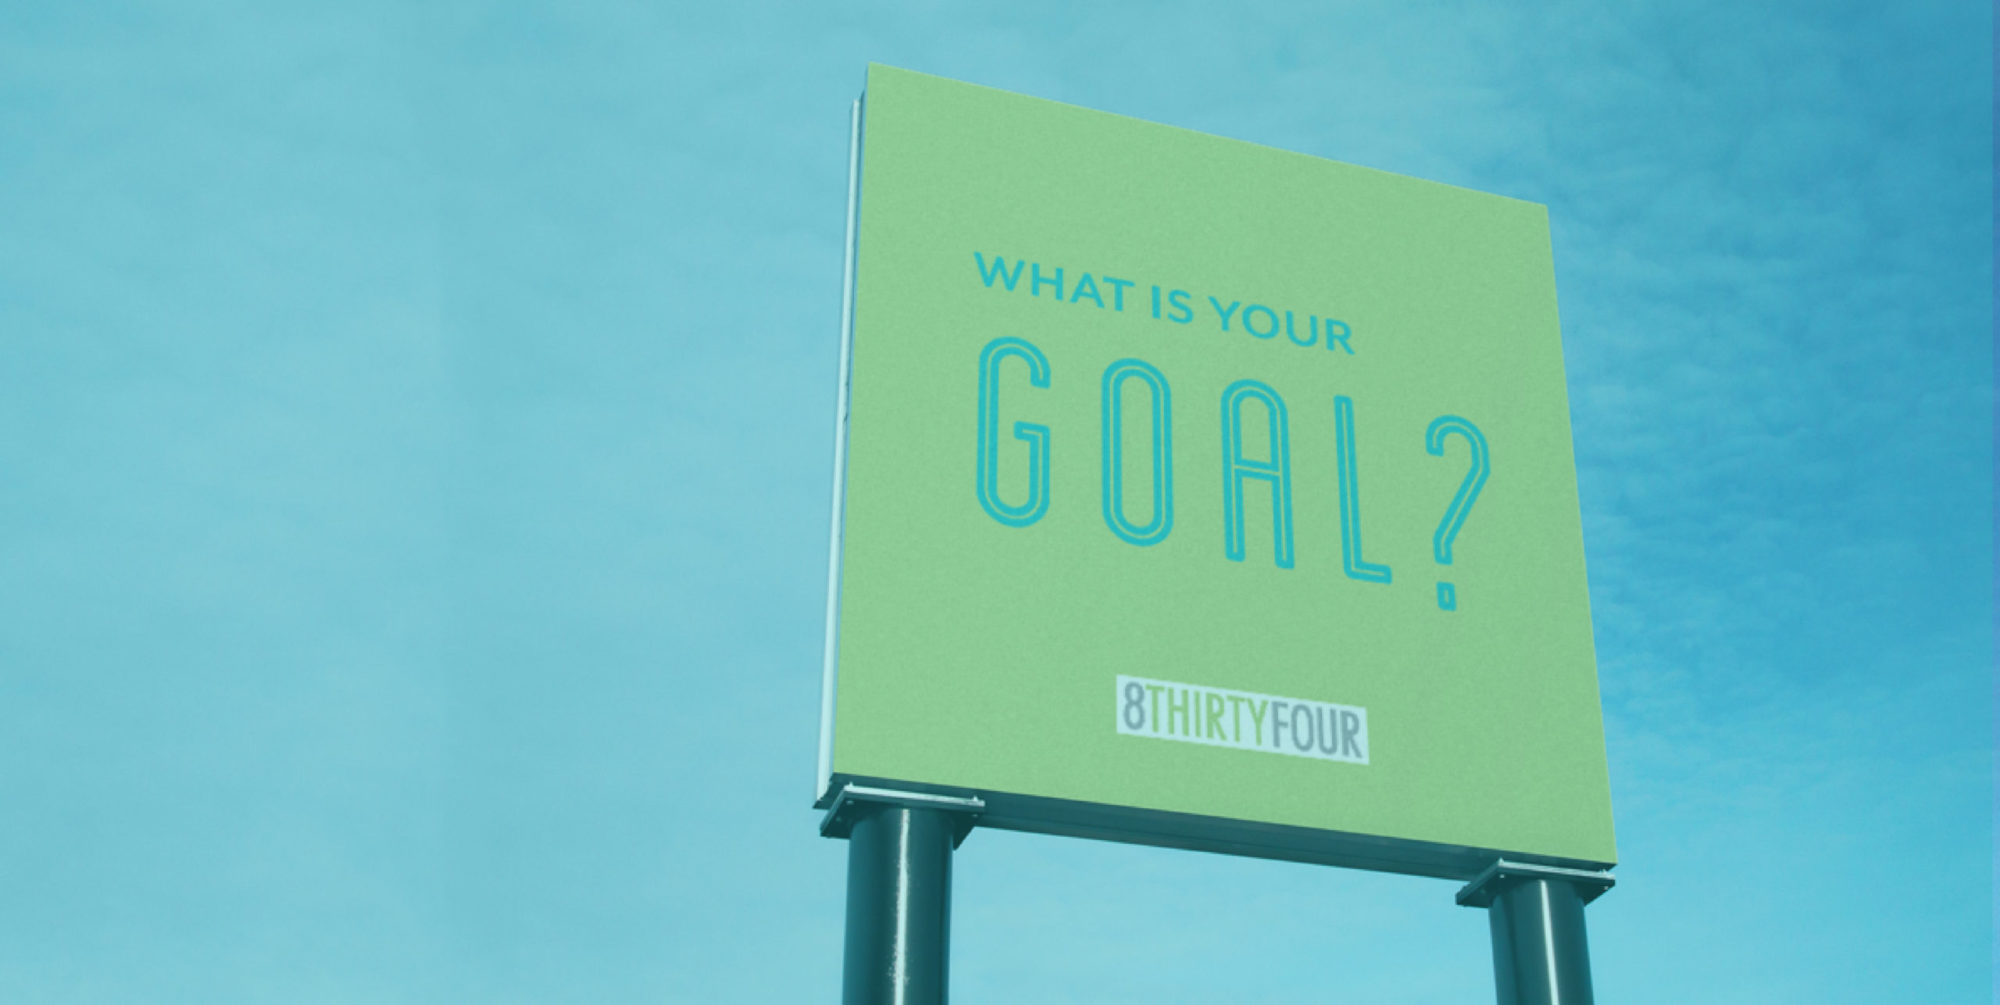 A billboard reads, "What is your goal? 8THIRTYFOUR"